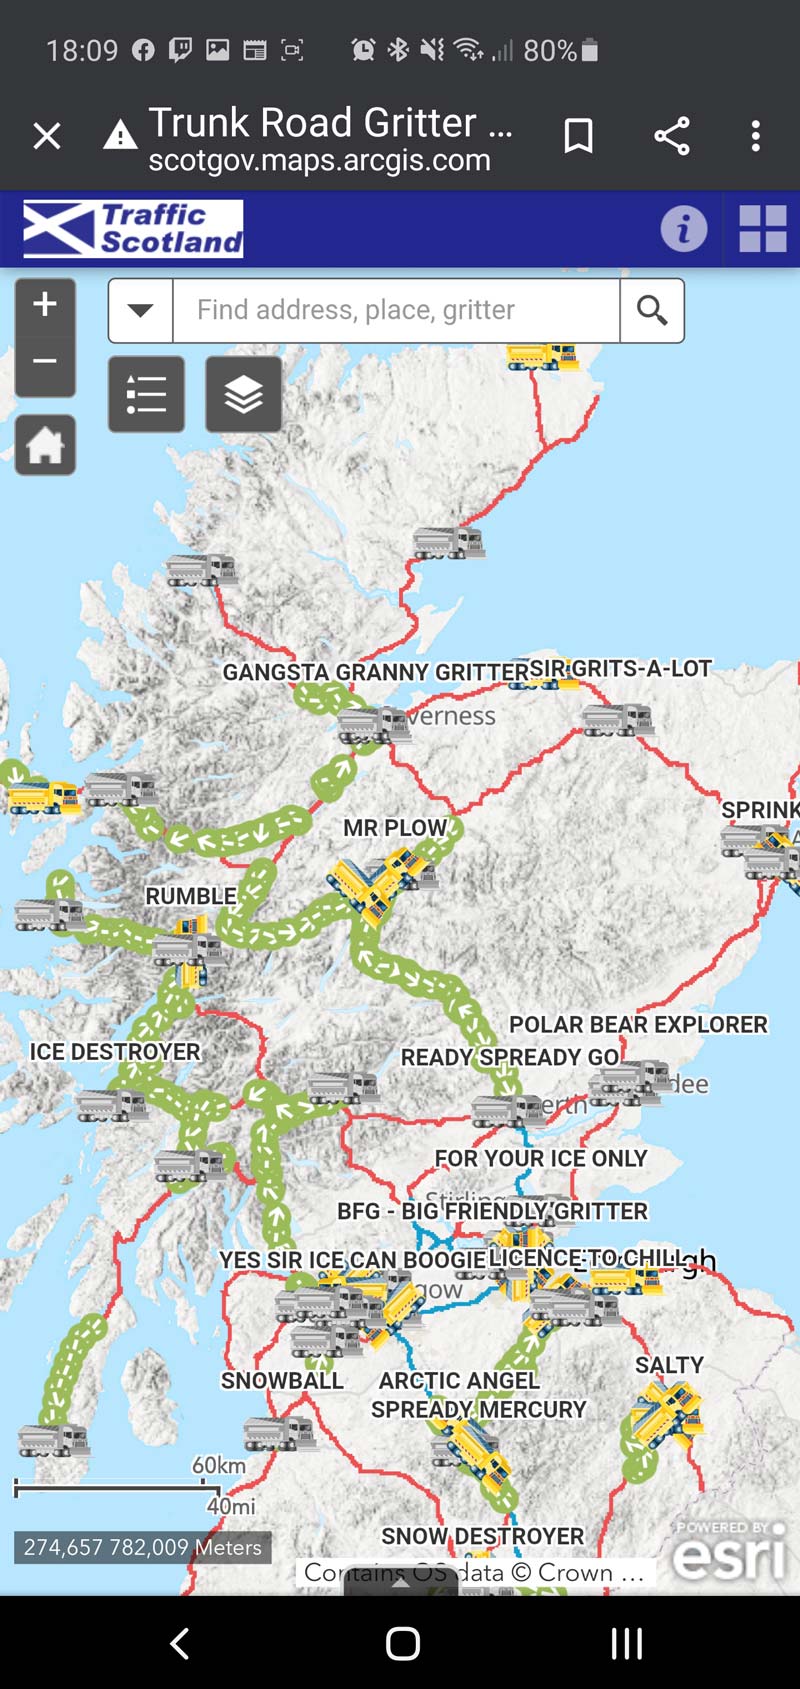 The names of the Road Gritters across Scotland